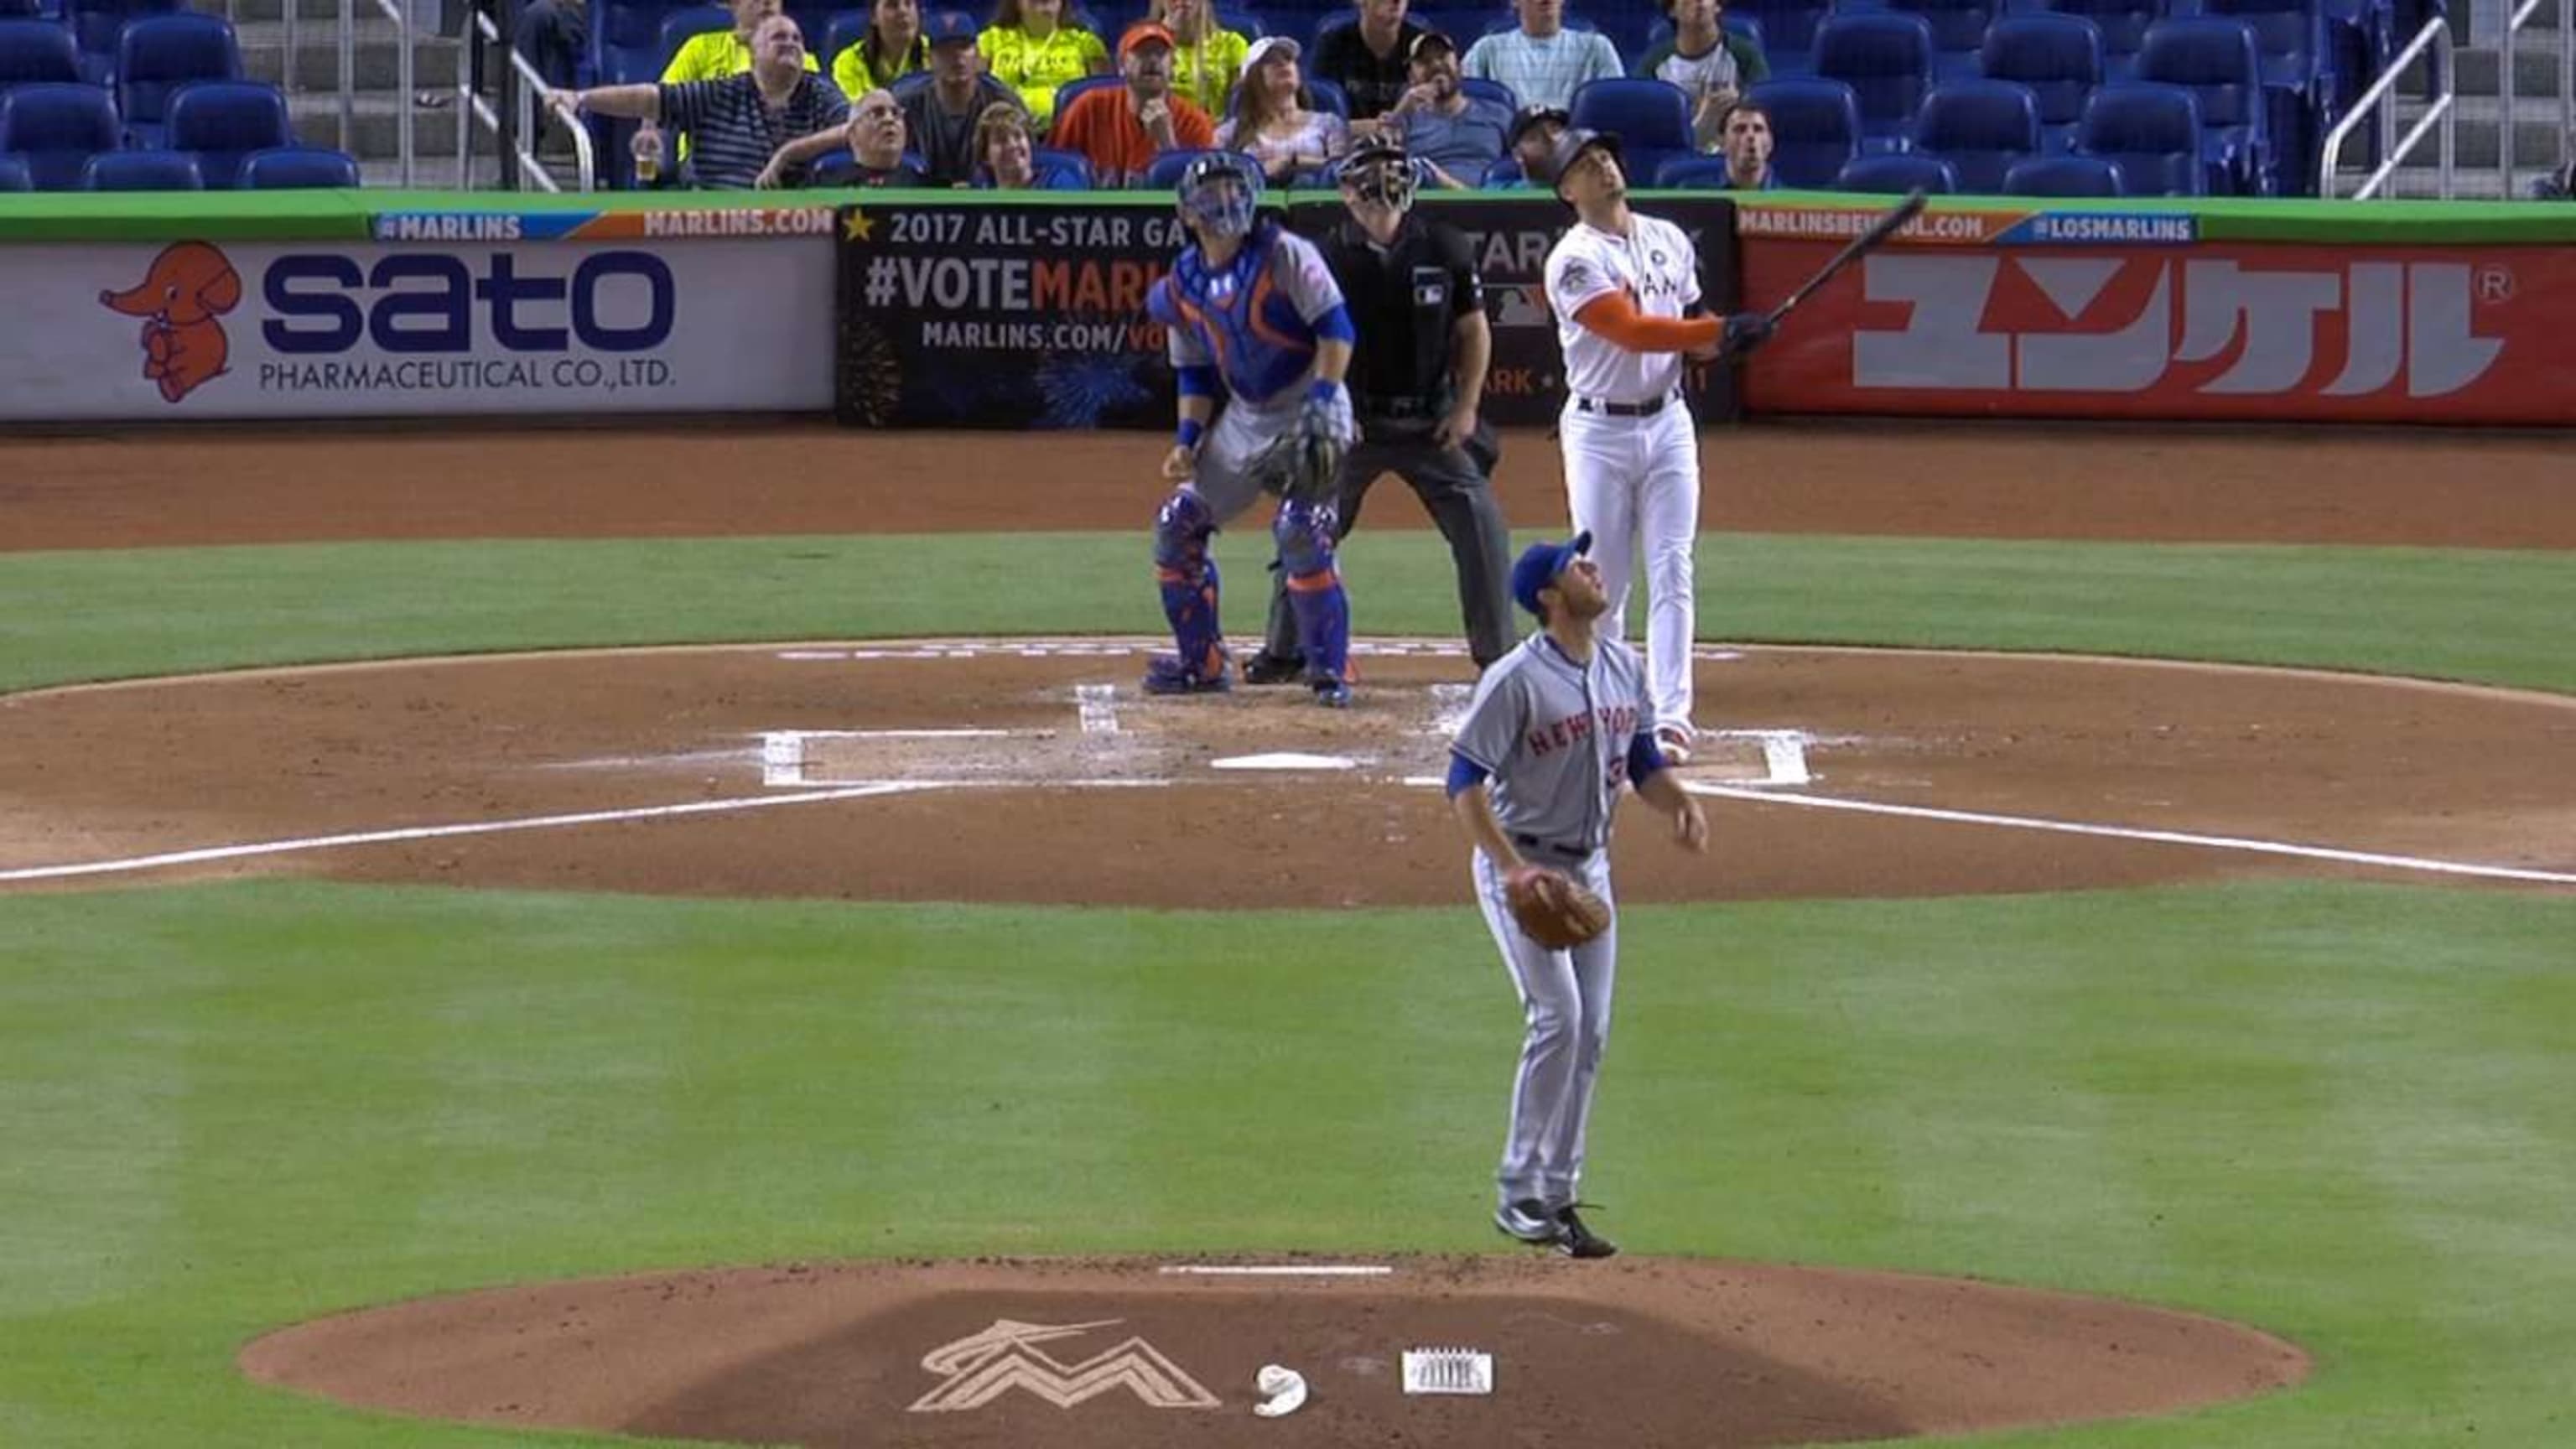 Giancarlo Stanton's 475-foot home run nearly leaves Marlins Park